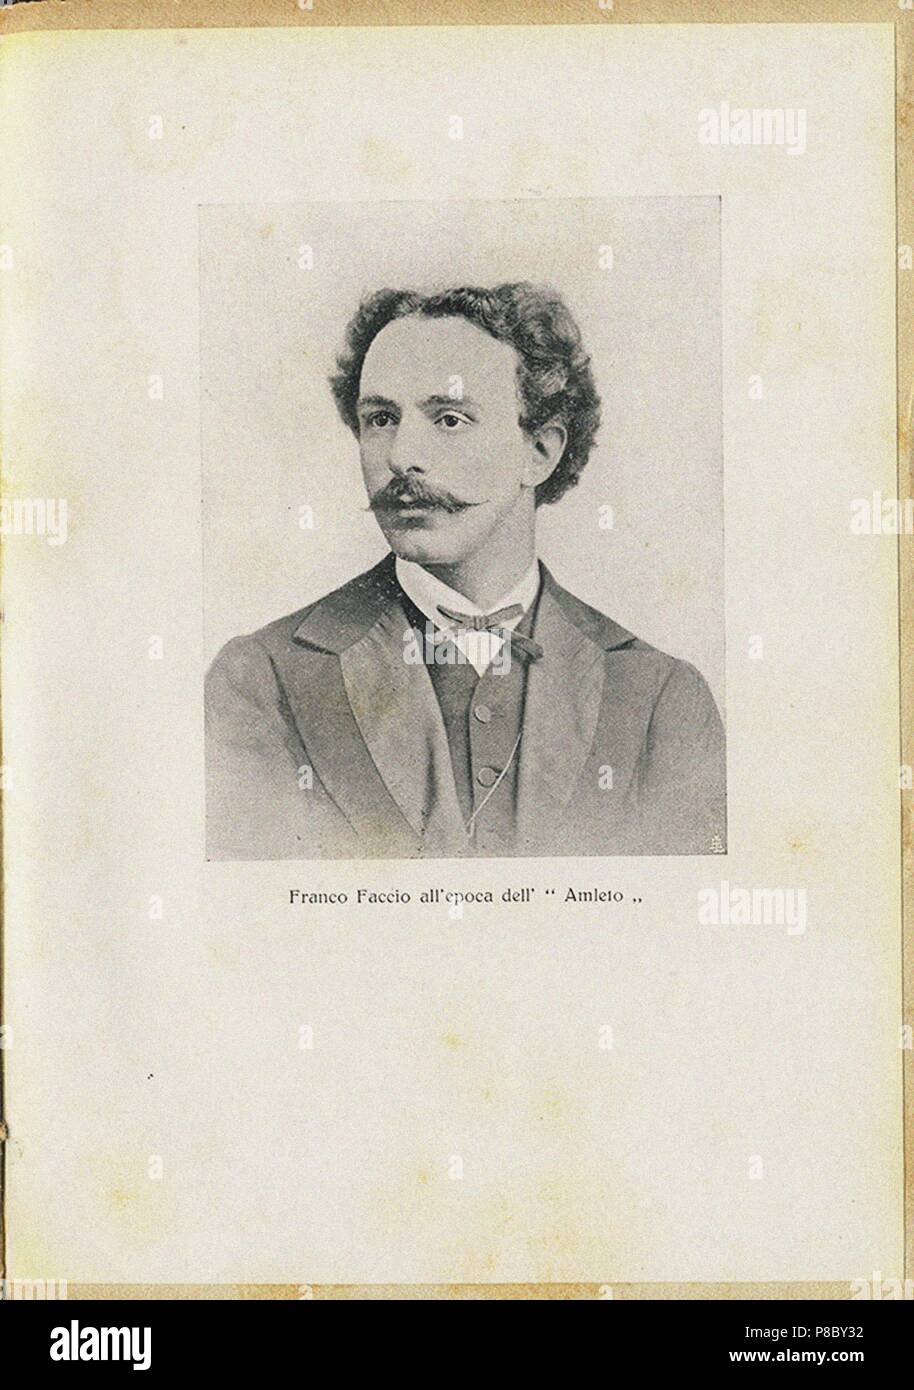 Franco Faccio during the time of 'Amleto'. Museum: National Hispanic Cultural Center. Stock Photo